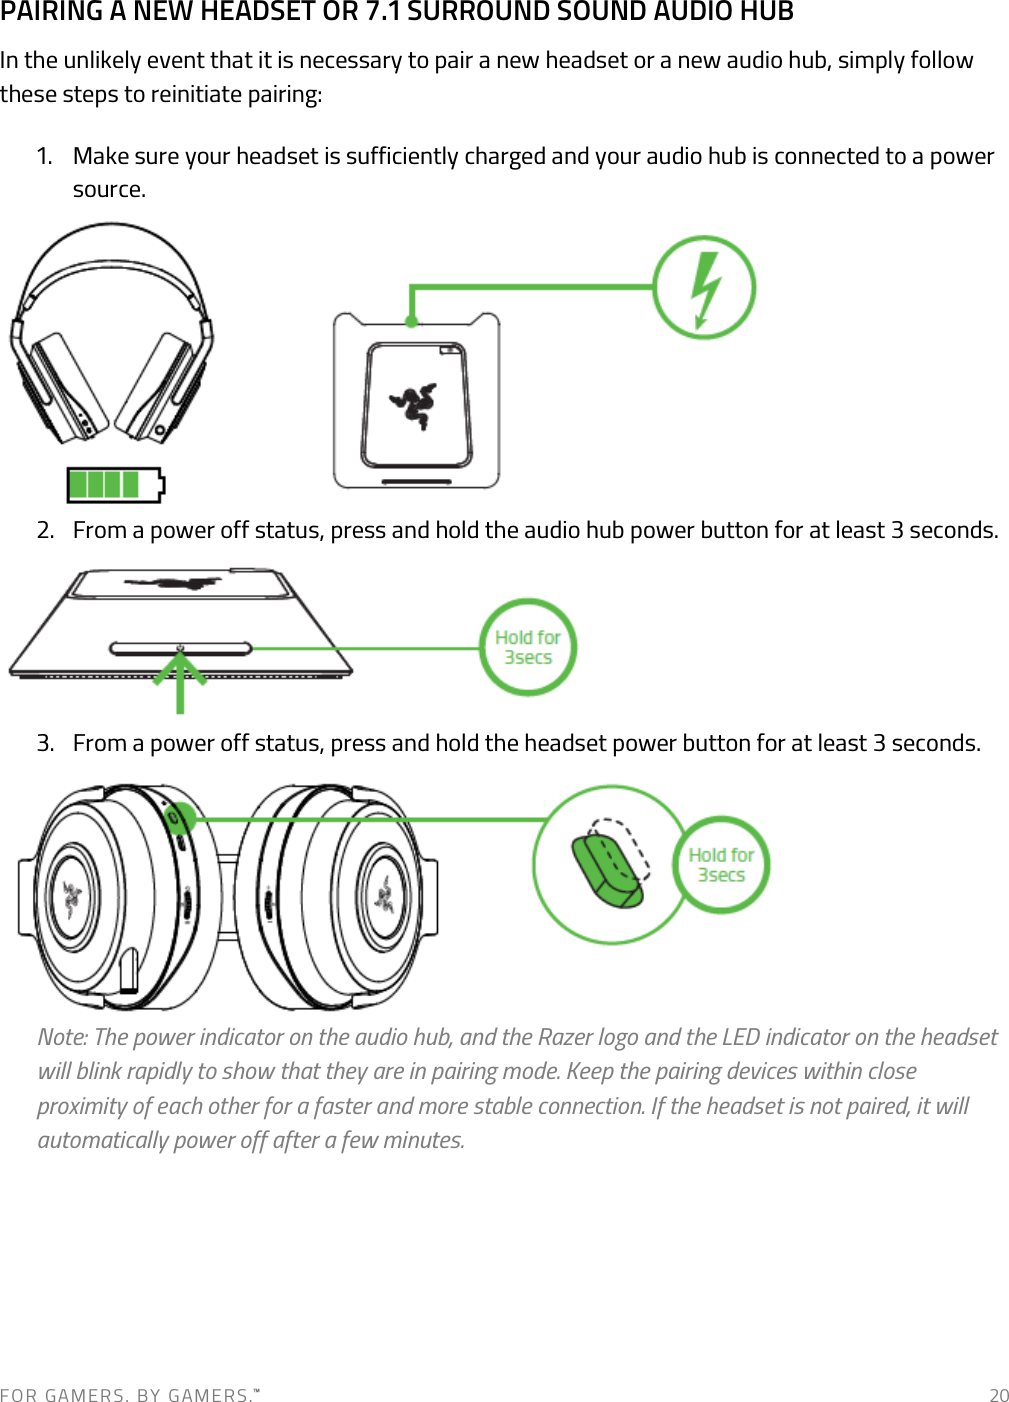 F O R   G A M E R S .   B Y   G AM E R S .™   20 PAIRING A NEW HEADSET OR 7.1 SURROUND SOUND AUDIO HUB In the unlikely event that it is necessary to pair a new headset or a new audio hub, simply follow these steps to reinitiate pairing: 1. Make sure your headset is sufficiently charged and your audio hub is connected to a power source.        2. From a power off status, press and hold the audio hub power button for at least 3 seconds.      3. From a power off status, press and hold the headset power button for at least 3 seconds.        Note: The power indicator on the audio hub, and the Razer logo and the LED indicator on the headset will blink rapidly to show that they are in pairing mode. Keep the pairing devices within close proximity of each other for a faster and more stable connection. If the headset is not paired, it will automatically power off after a few minutes.     